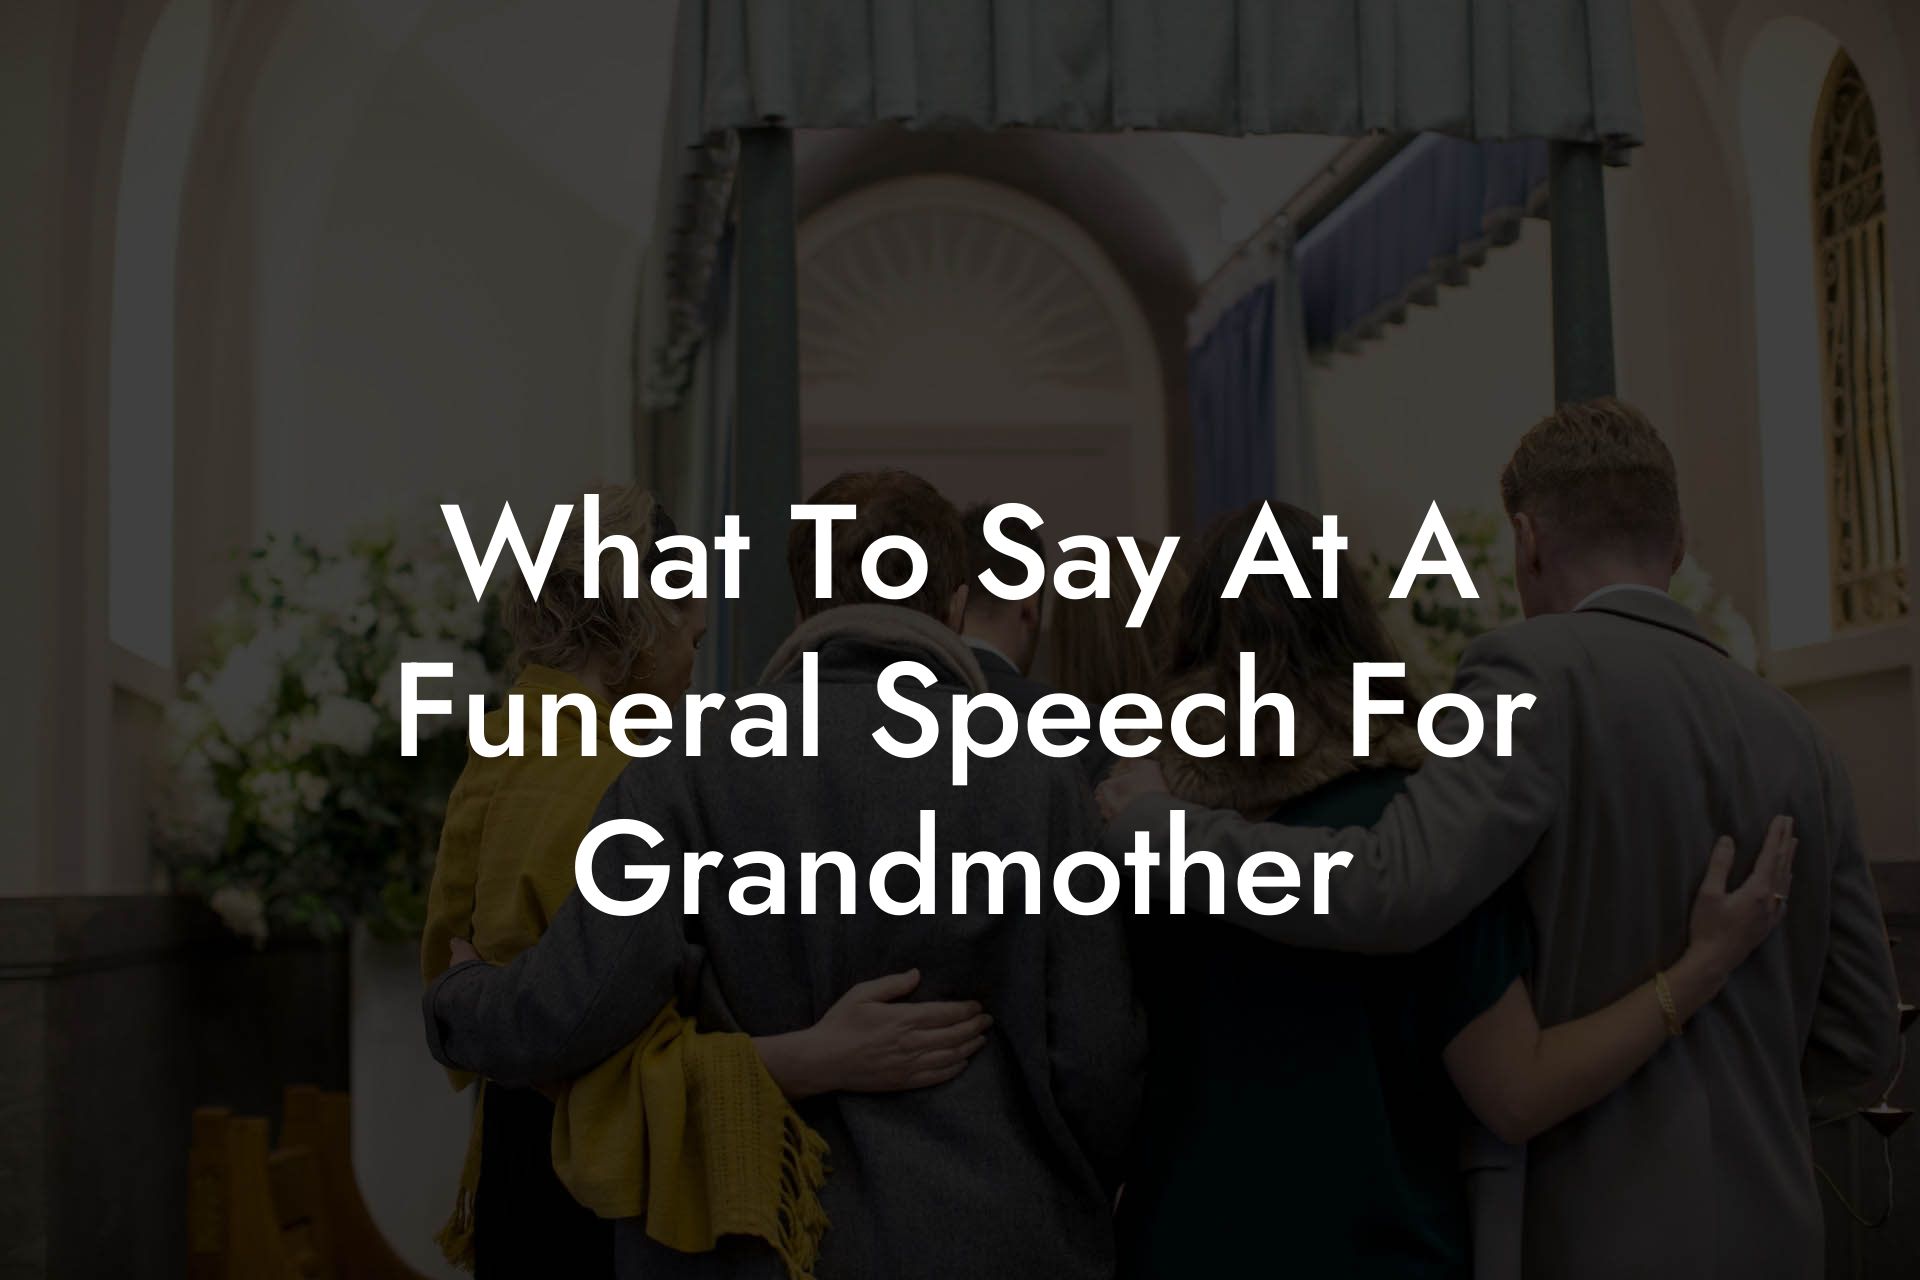 What To Say At A Funeral Speech For Grandmother